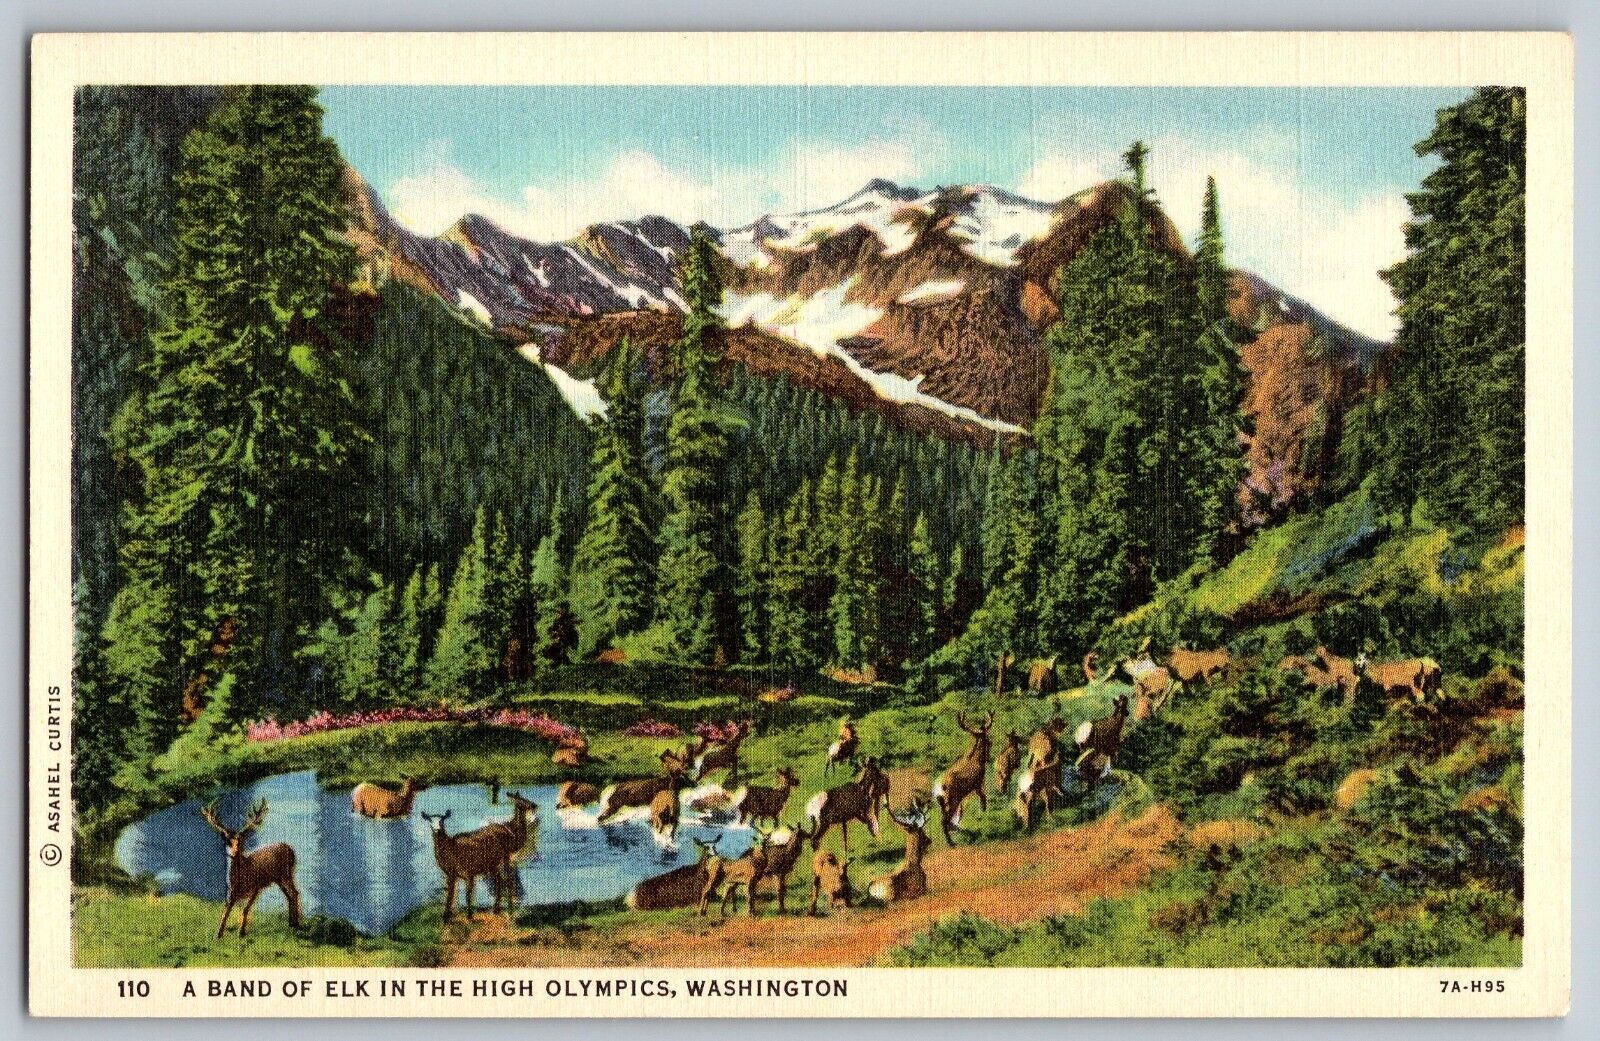 Olympia, Washington WA - A Band of Elk in the High Olympics - Vintage Postcard